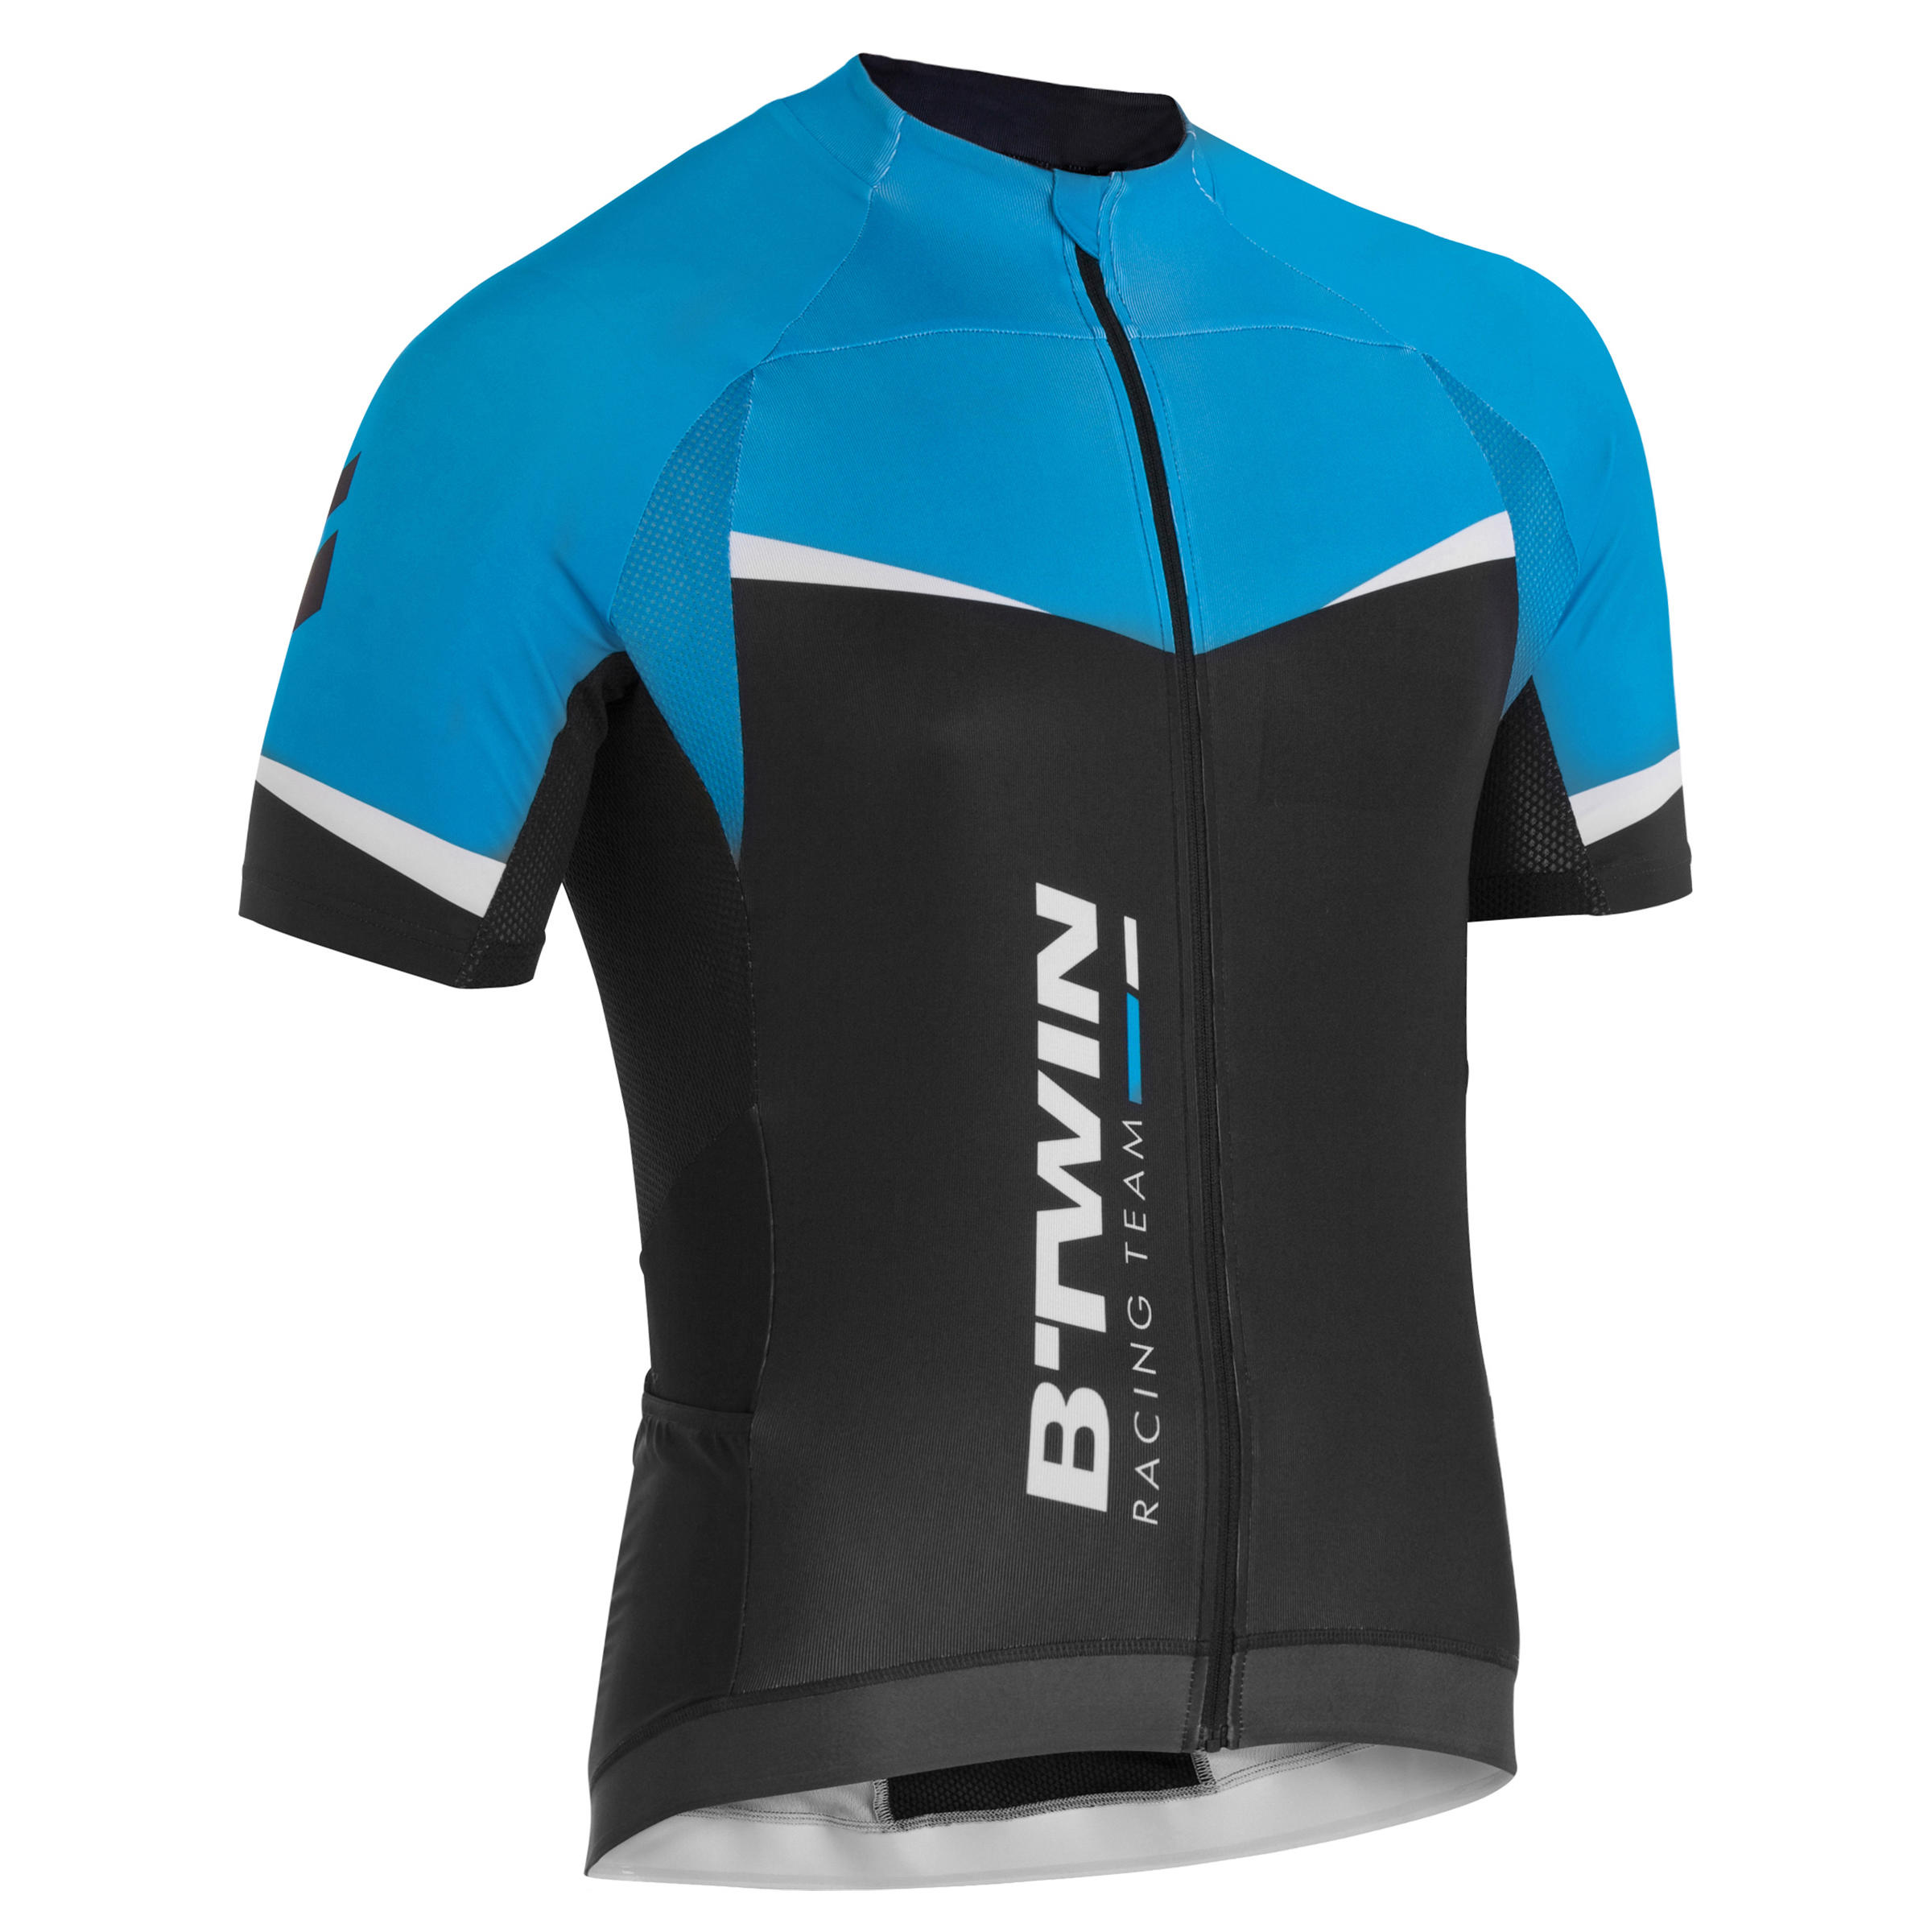 BTWIN 520 Short-Sleeved Cycling Jersey - Black/Blue